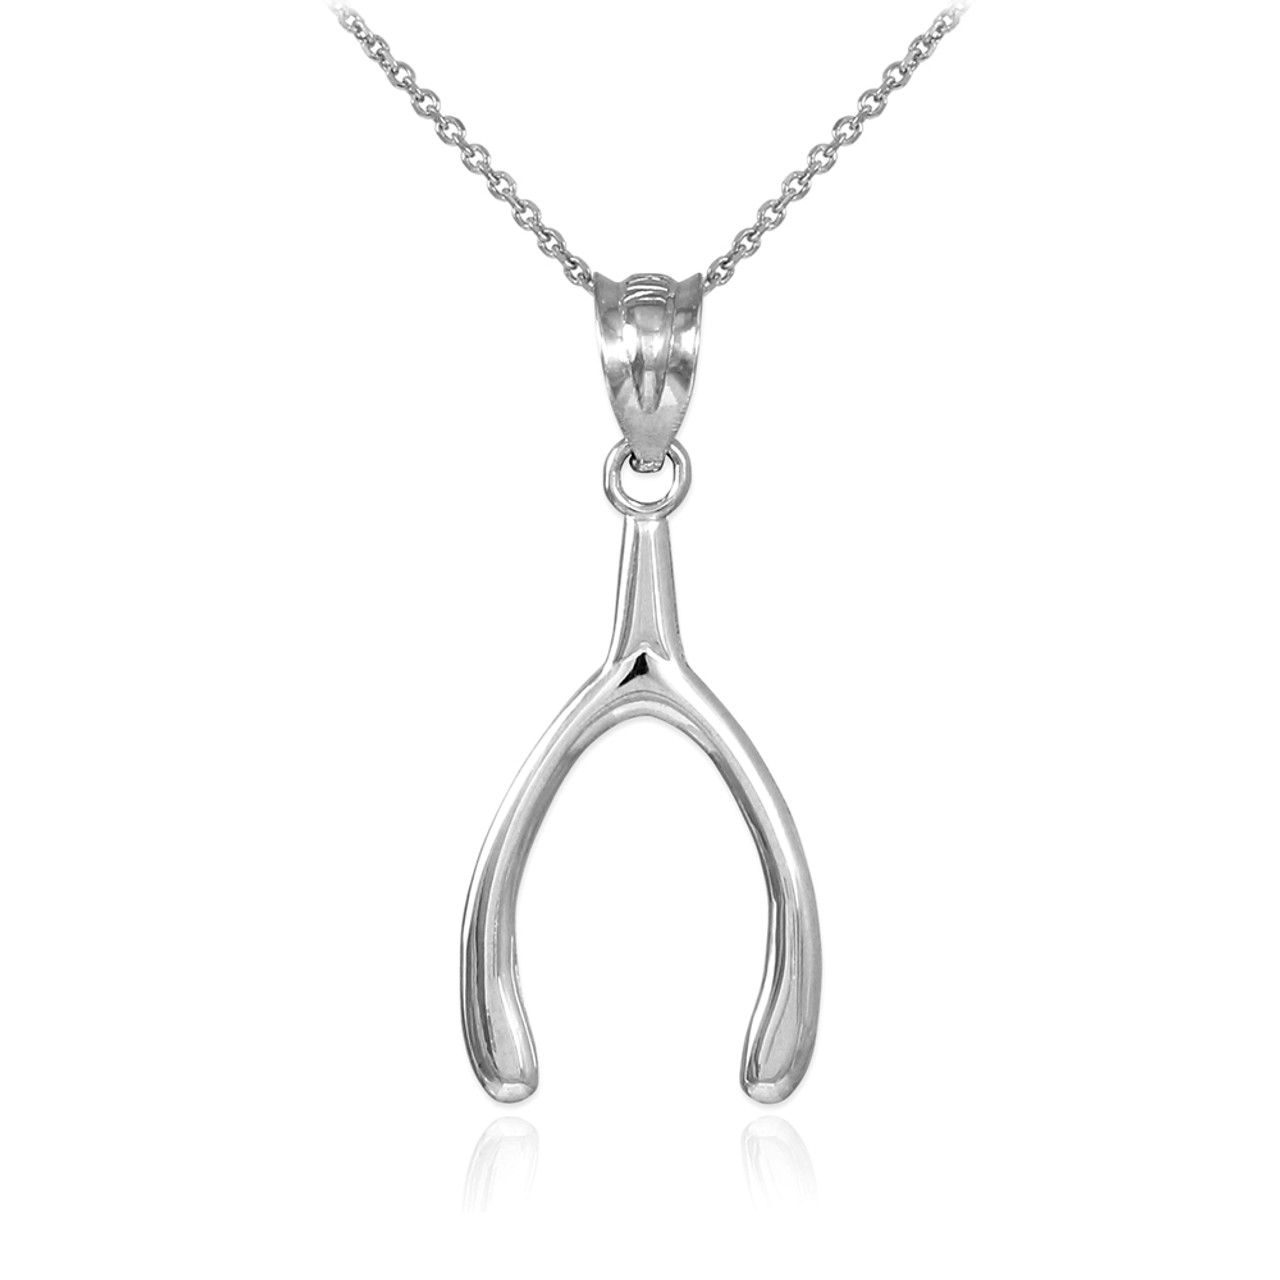 Buy Recycled Sterling Silver Wishbone Necklace Online | Plastic Free Pursuit